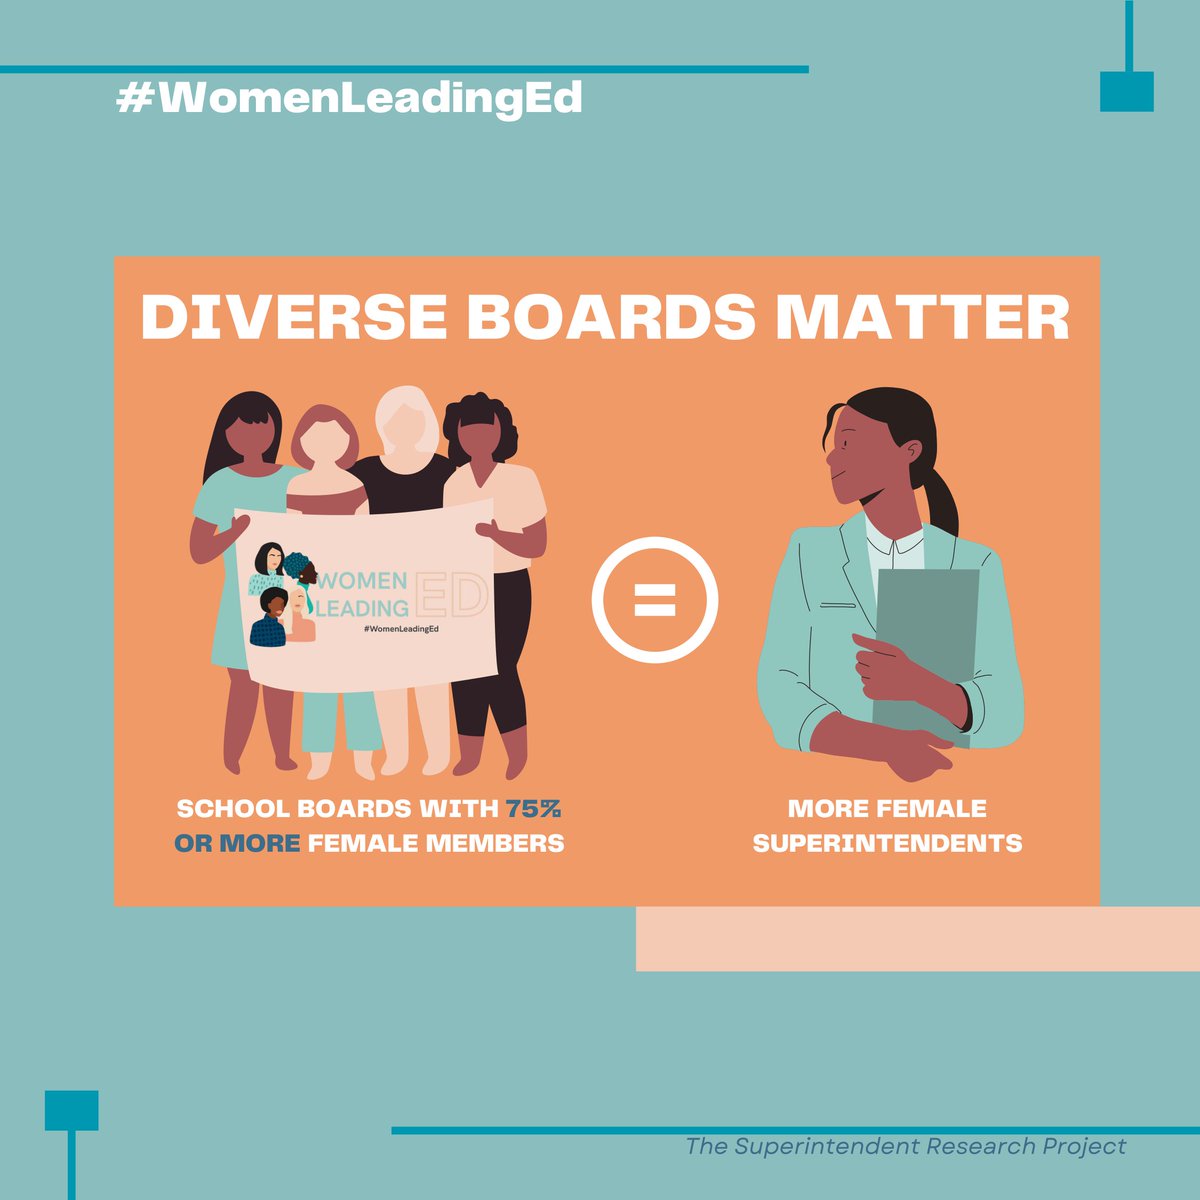 In districts with boards that are 75% or more female, nearly half (48%) of the Superintendents leading the District are women. More female leaders on school boards = more female superintendents. 🚺💪 More here: ilogroup.com/news/press-rel… #WomenLeadingED